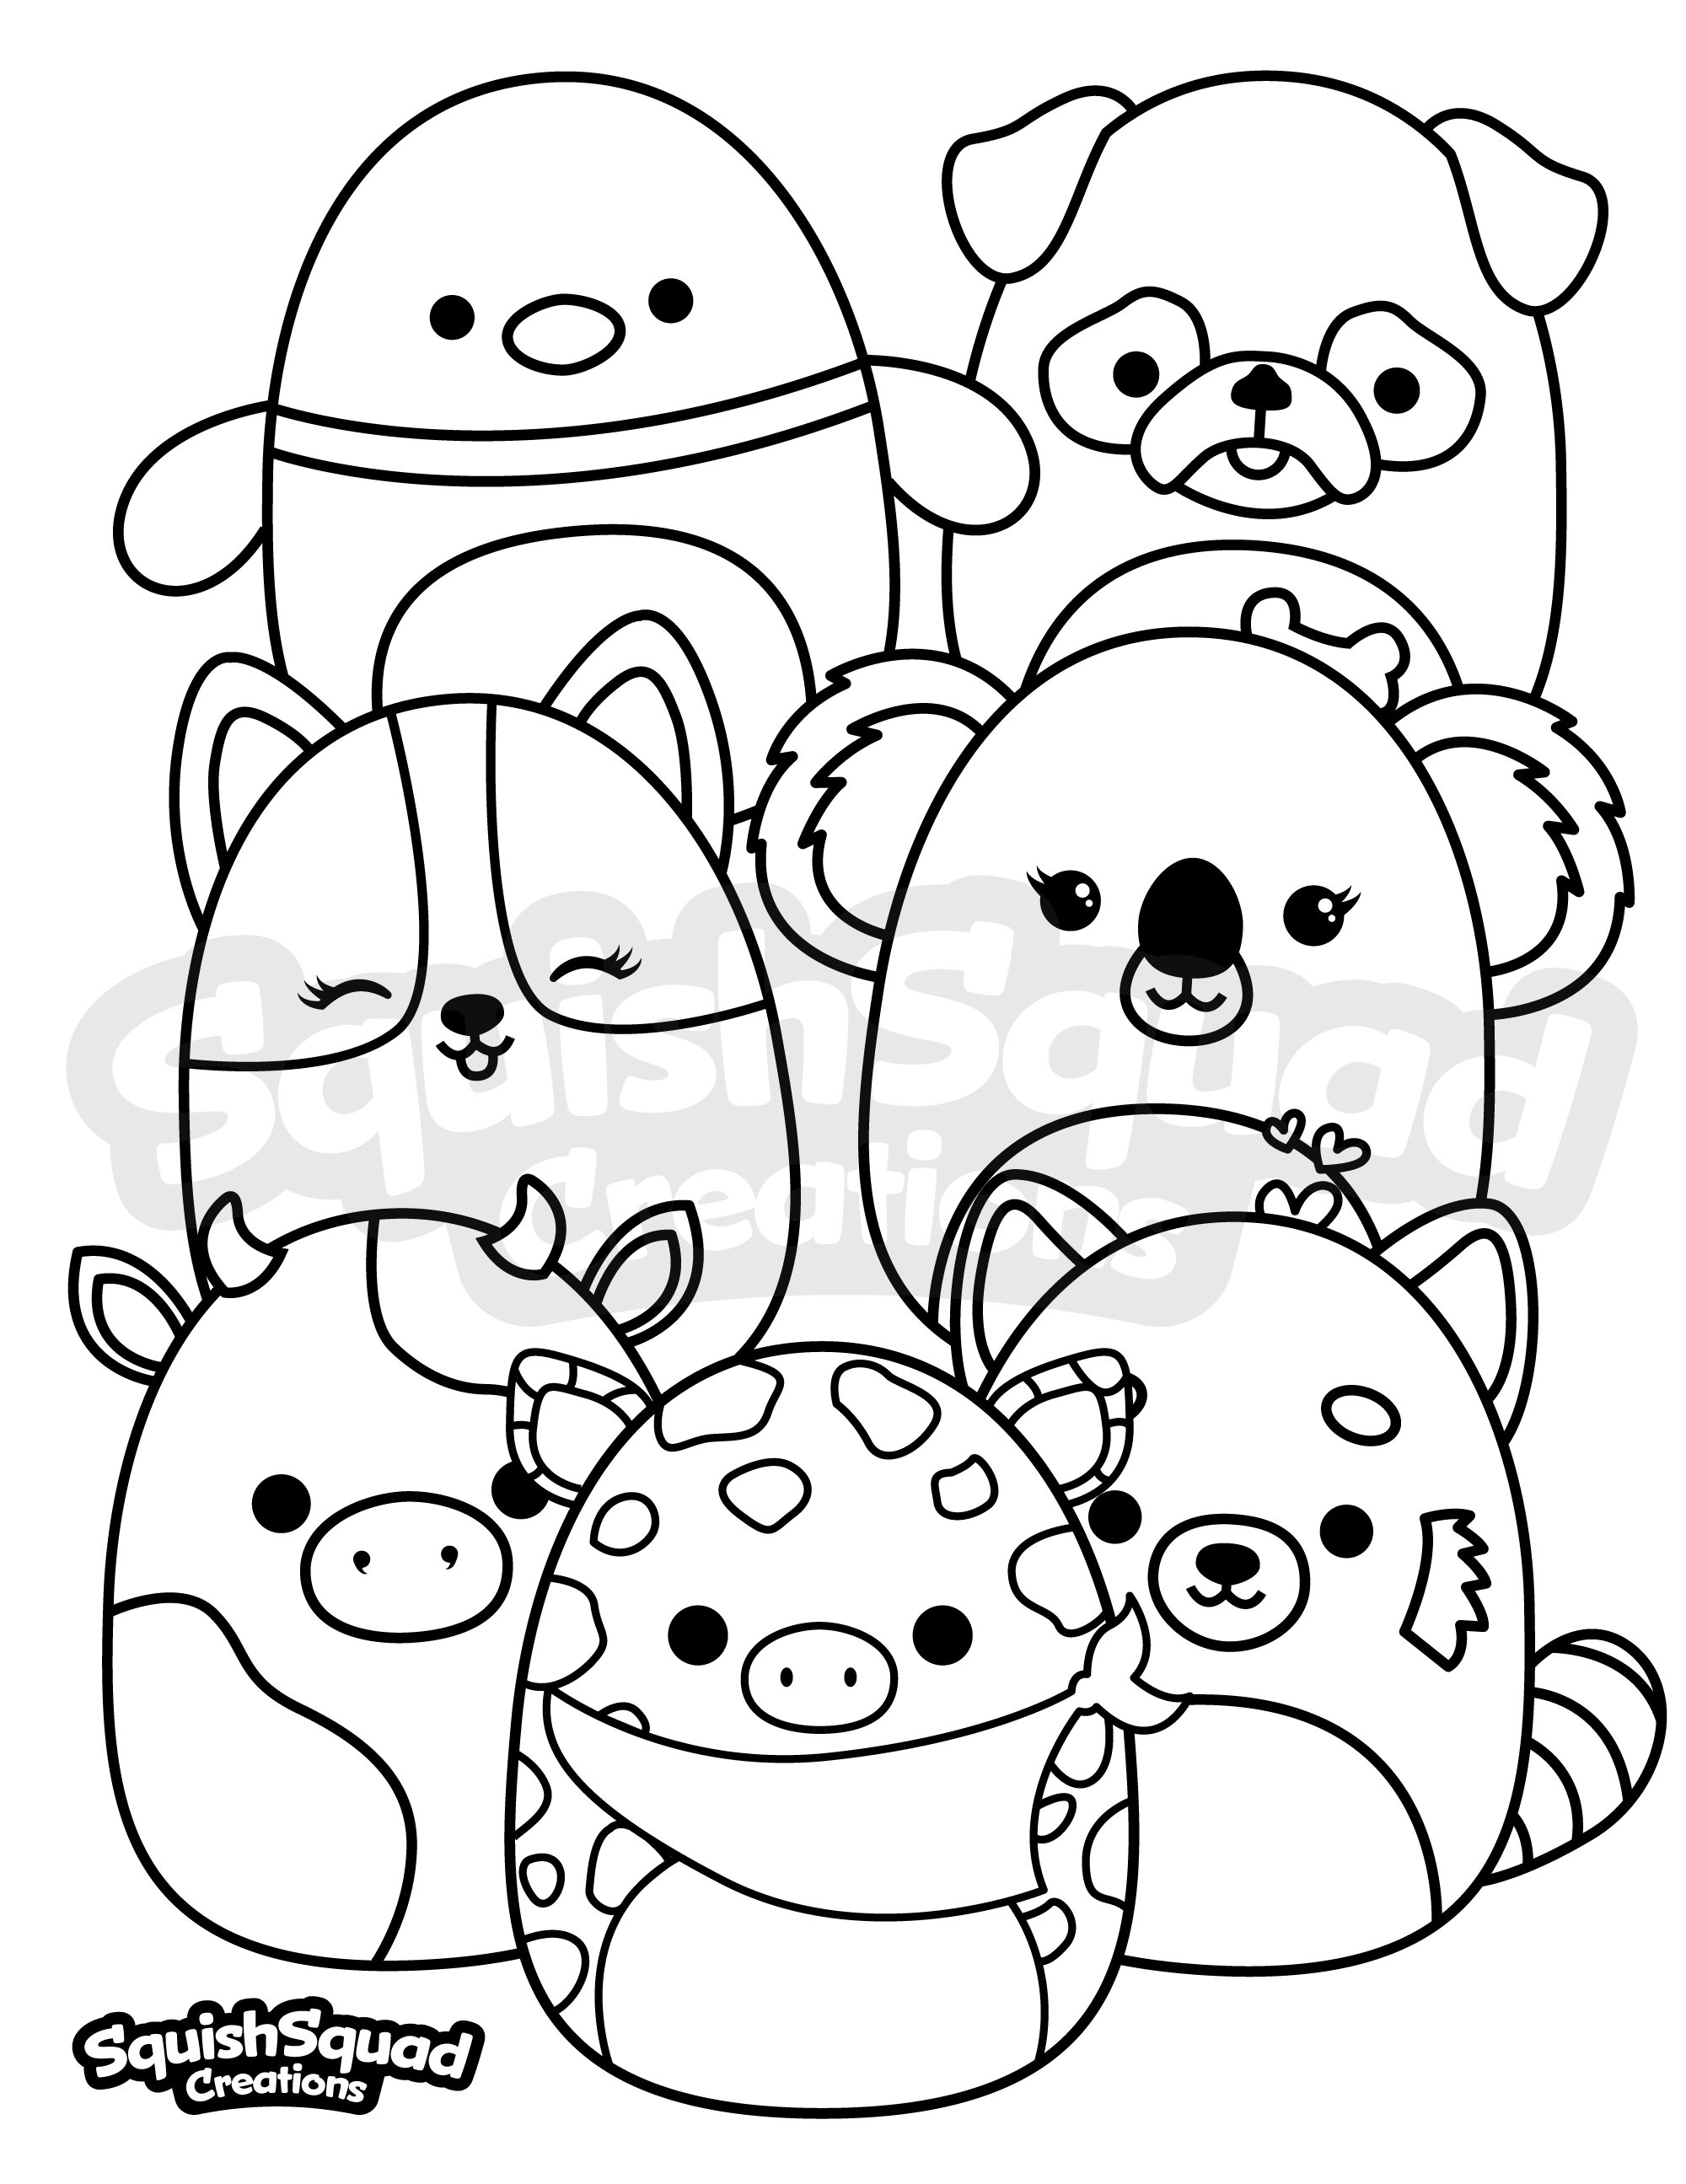 Squishmallow Coloring Page, Printable Squishmallow Coloring Page,  Squishmallow Downloadable Coloring Sheet, Coloring Page For Kids